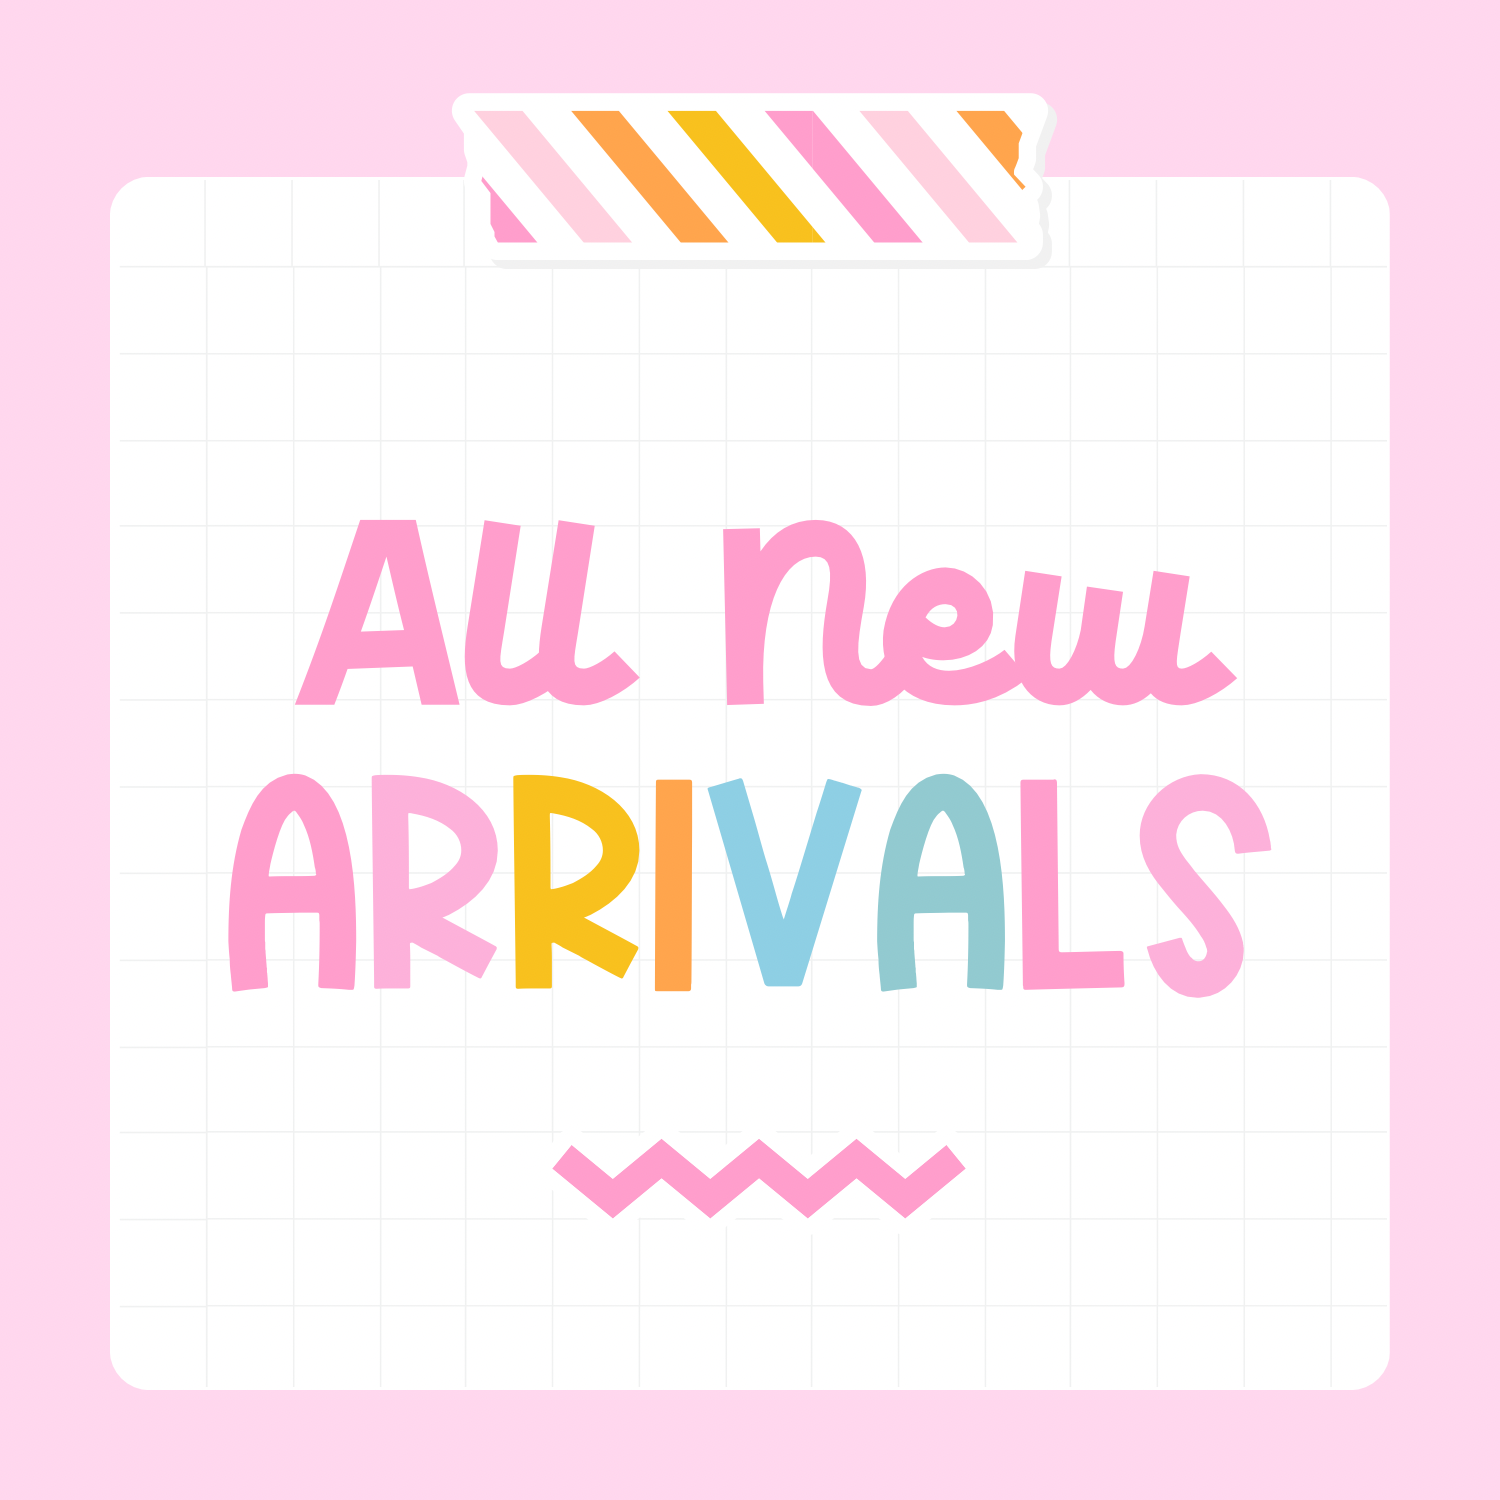 New Arrivals collection cover 